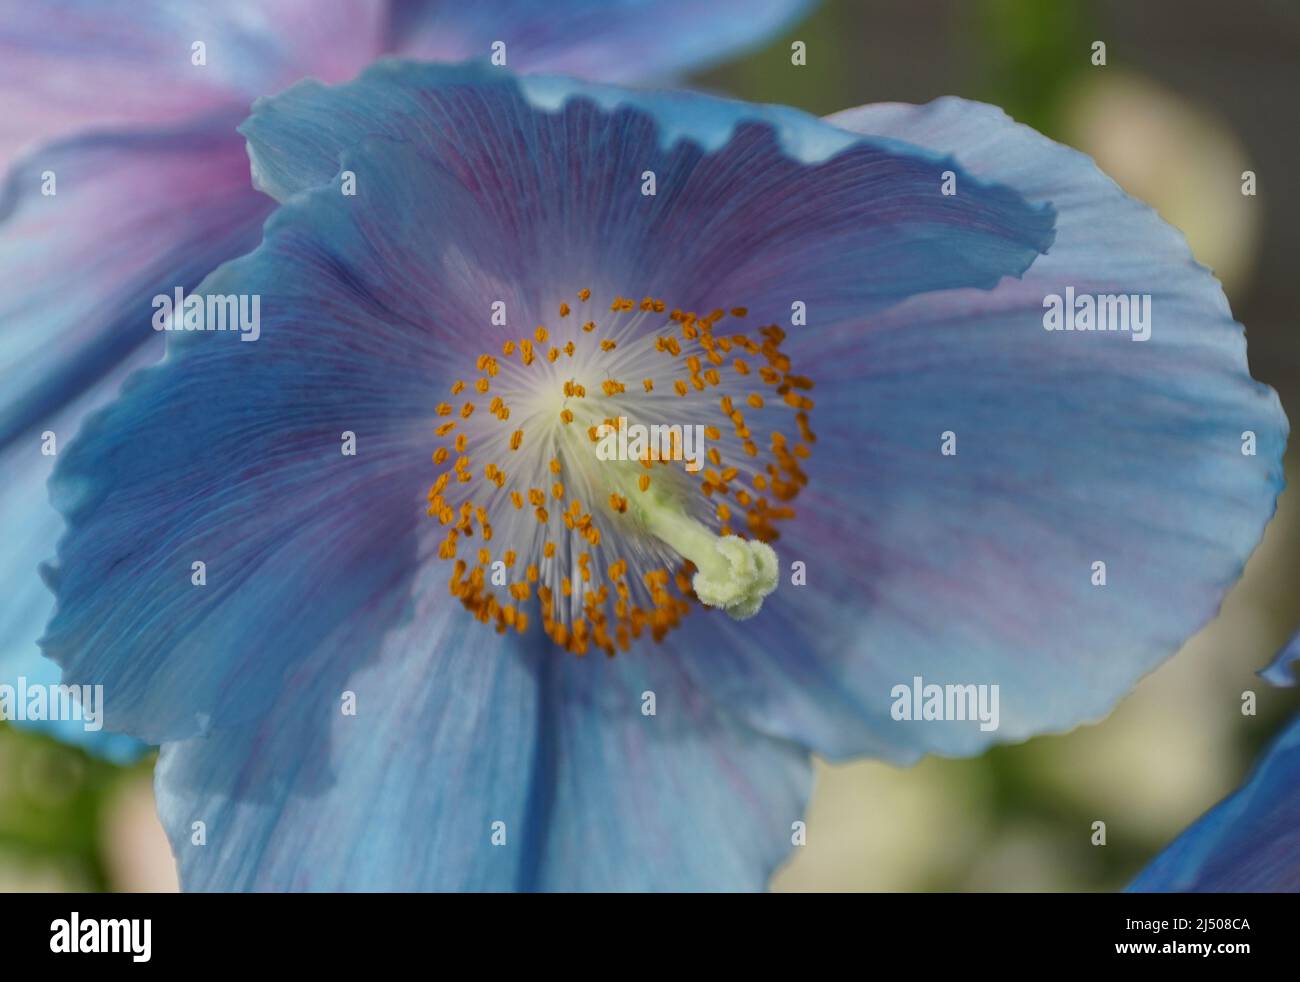 Close up of a beautiful Blue Poppy 'Lingholm' flower Stock Photo